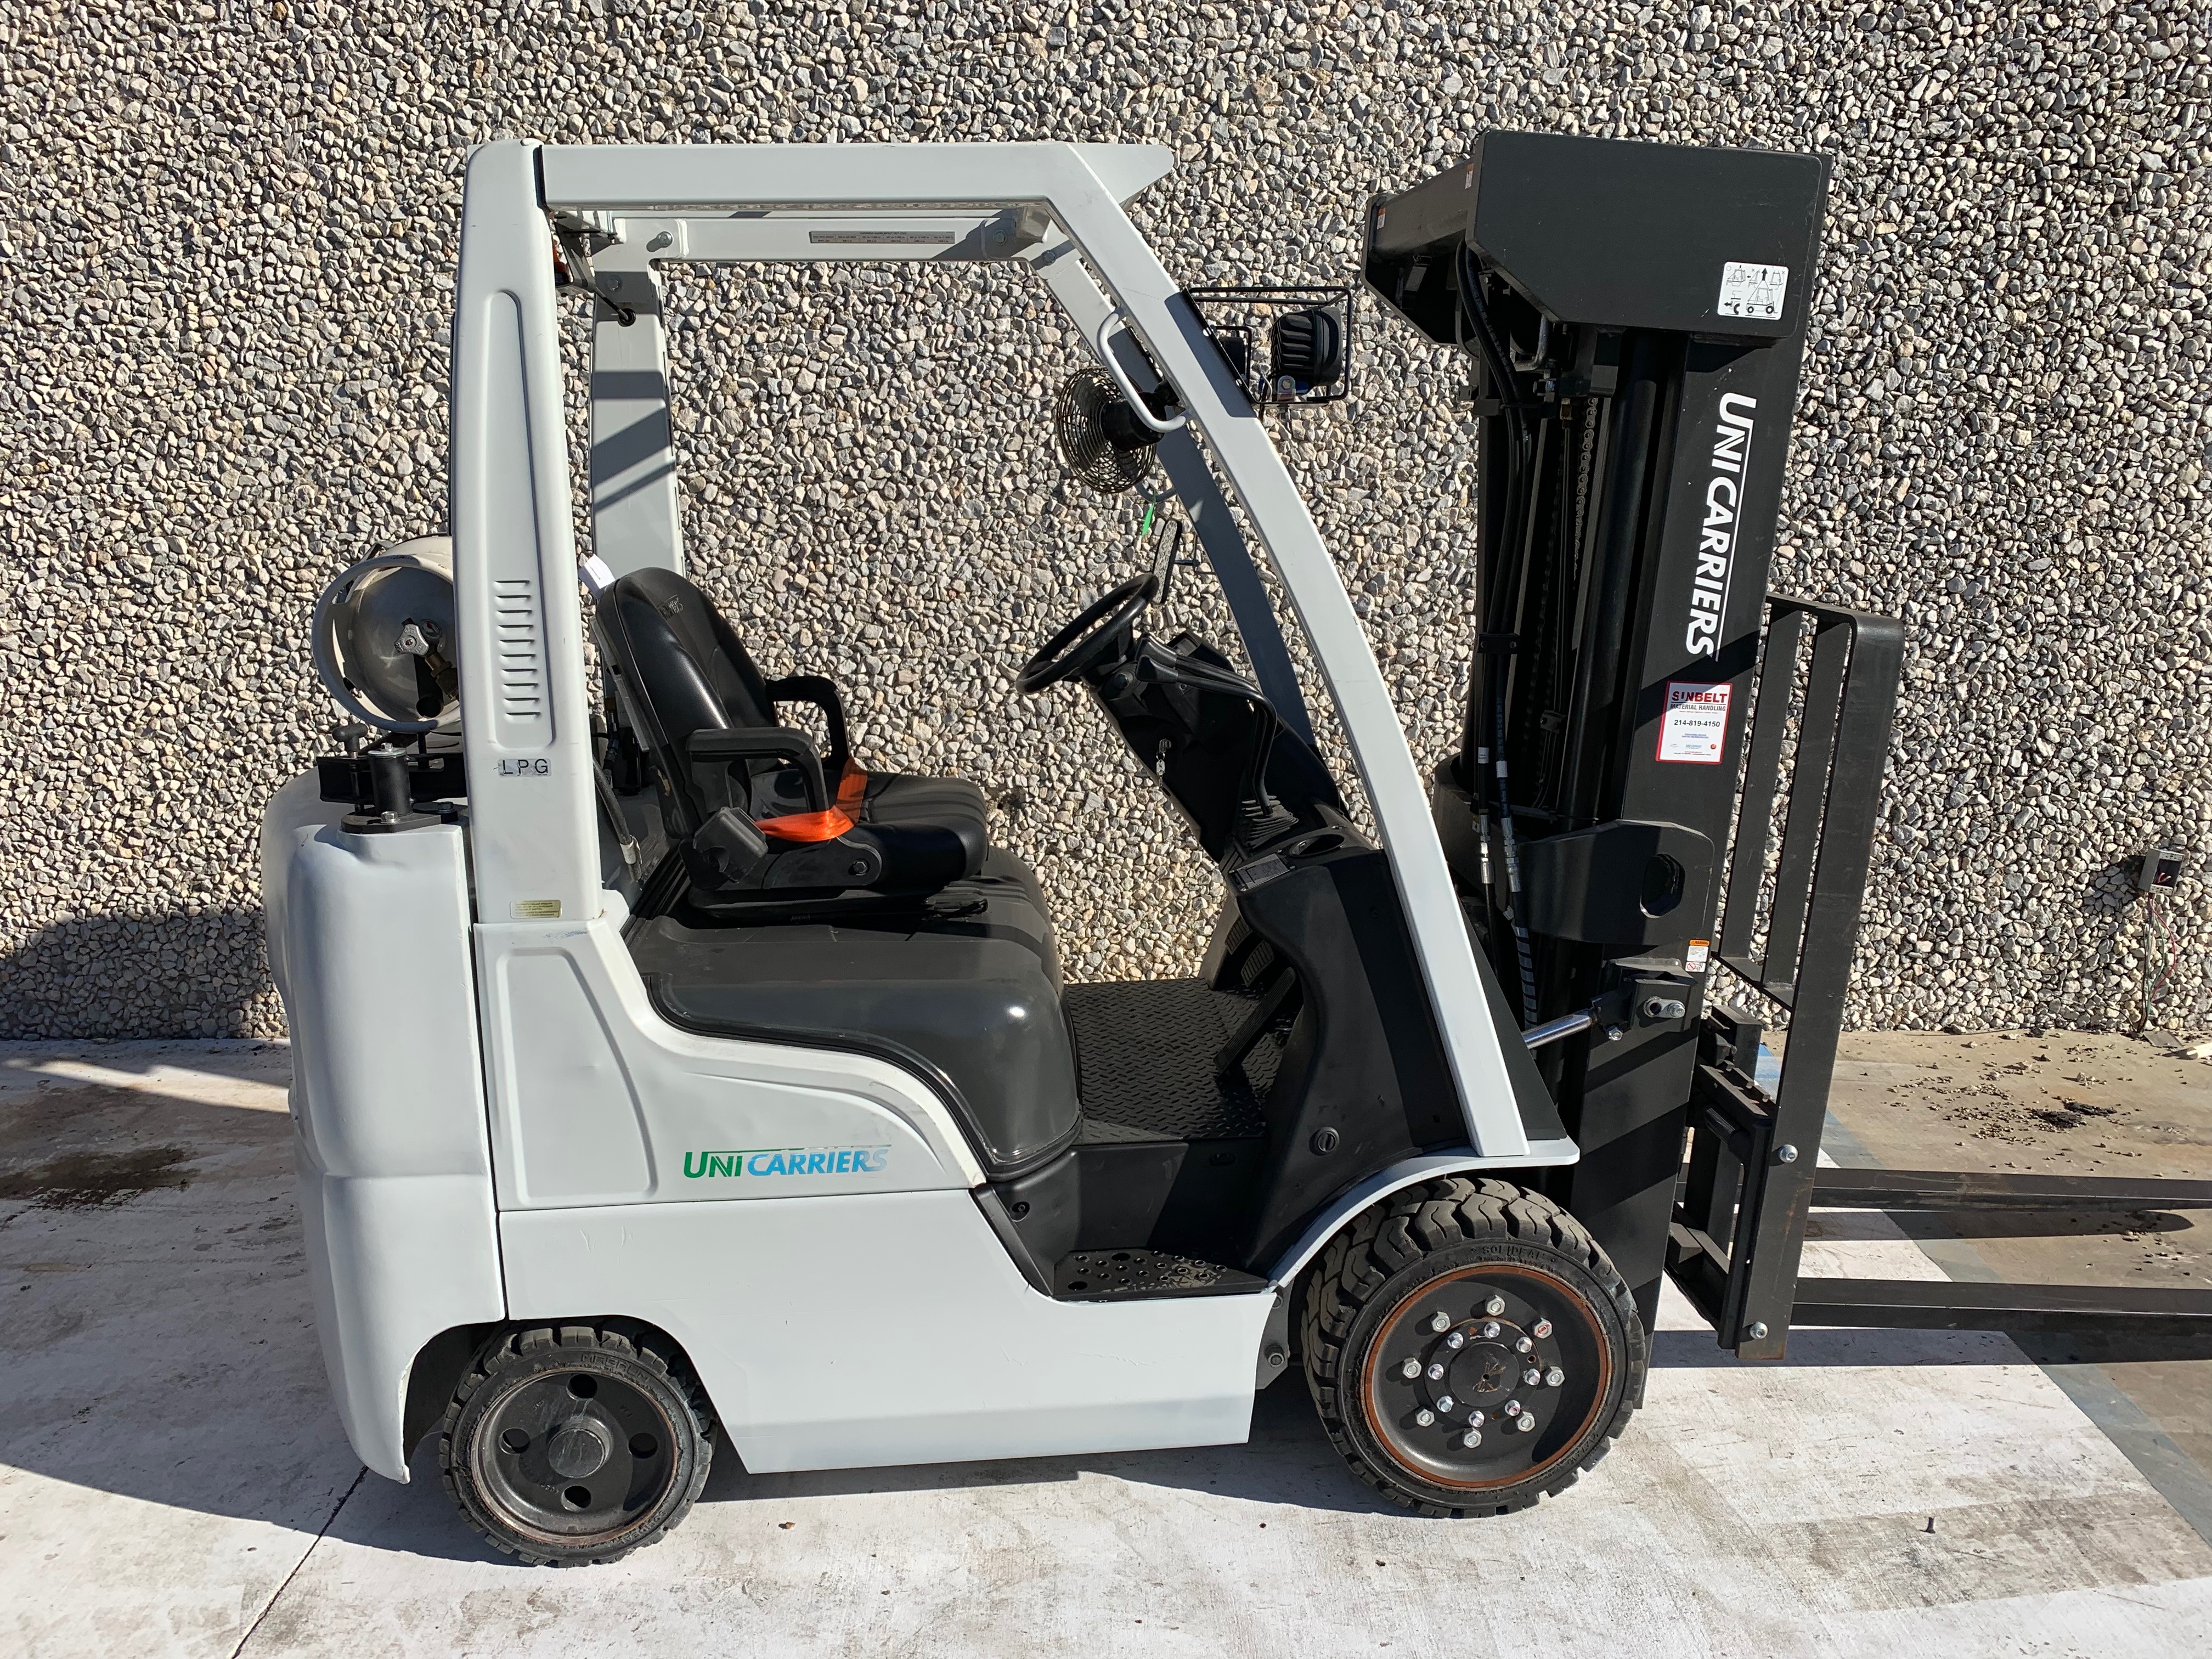 Used Forklift For Sale in Dallas, Fort Worth, Austin, San Antonio, Tulsa, and Oklahoma City